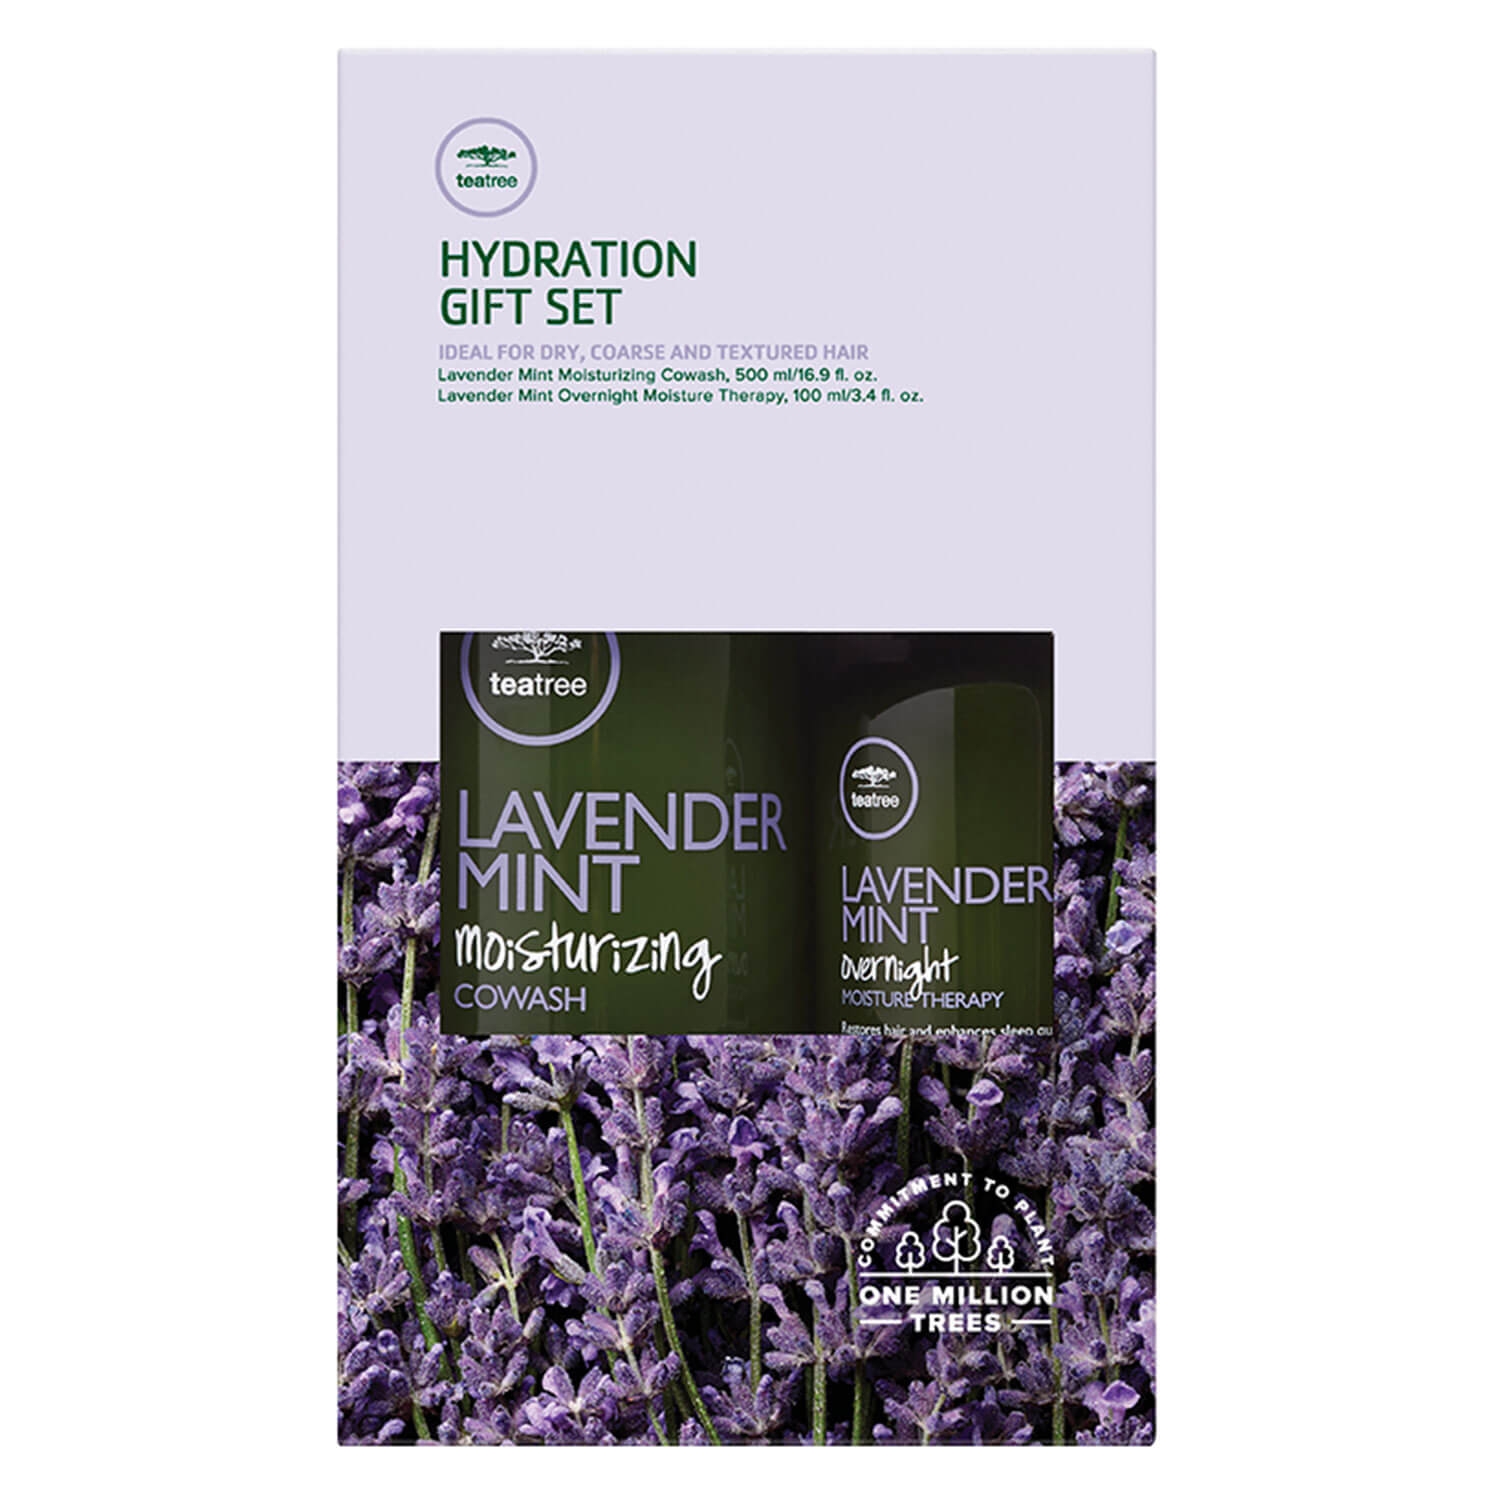 Product image from Tea Tree Lavender Mint - Hydration Gift Set